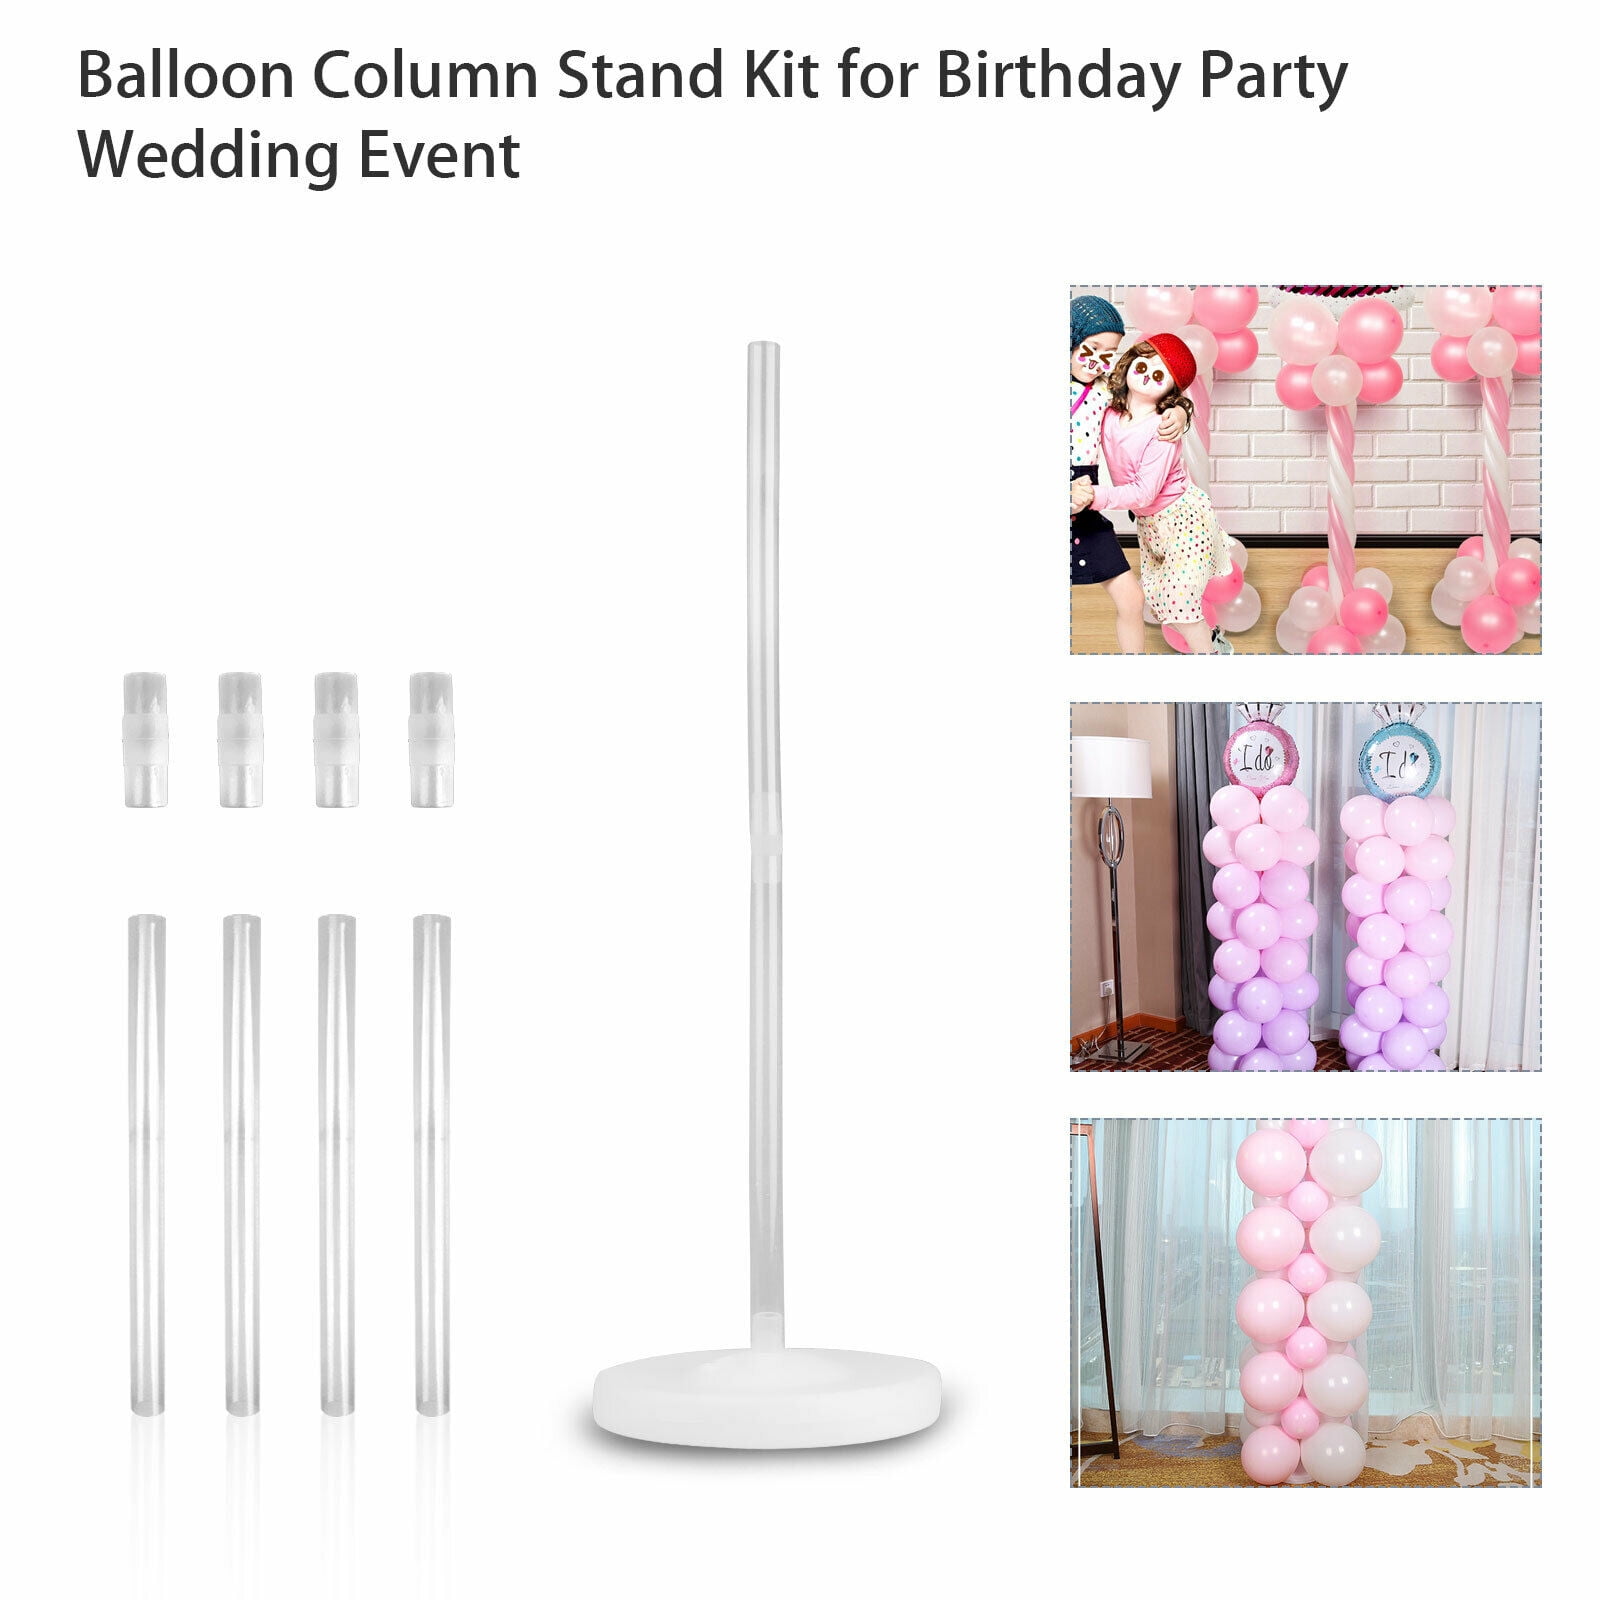 Plastic Balloon Arch Column Stand With Base Kits Wedding/Birthday Party Decor*1 